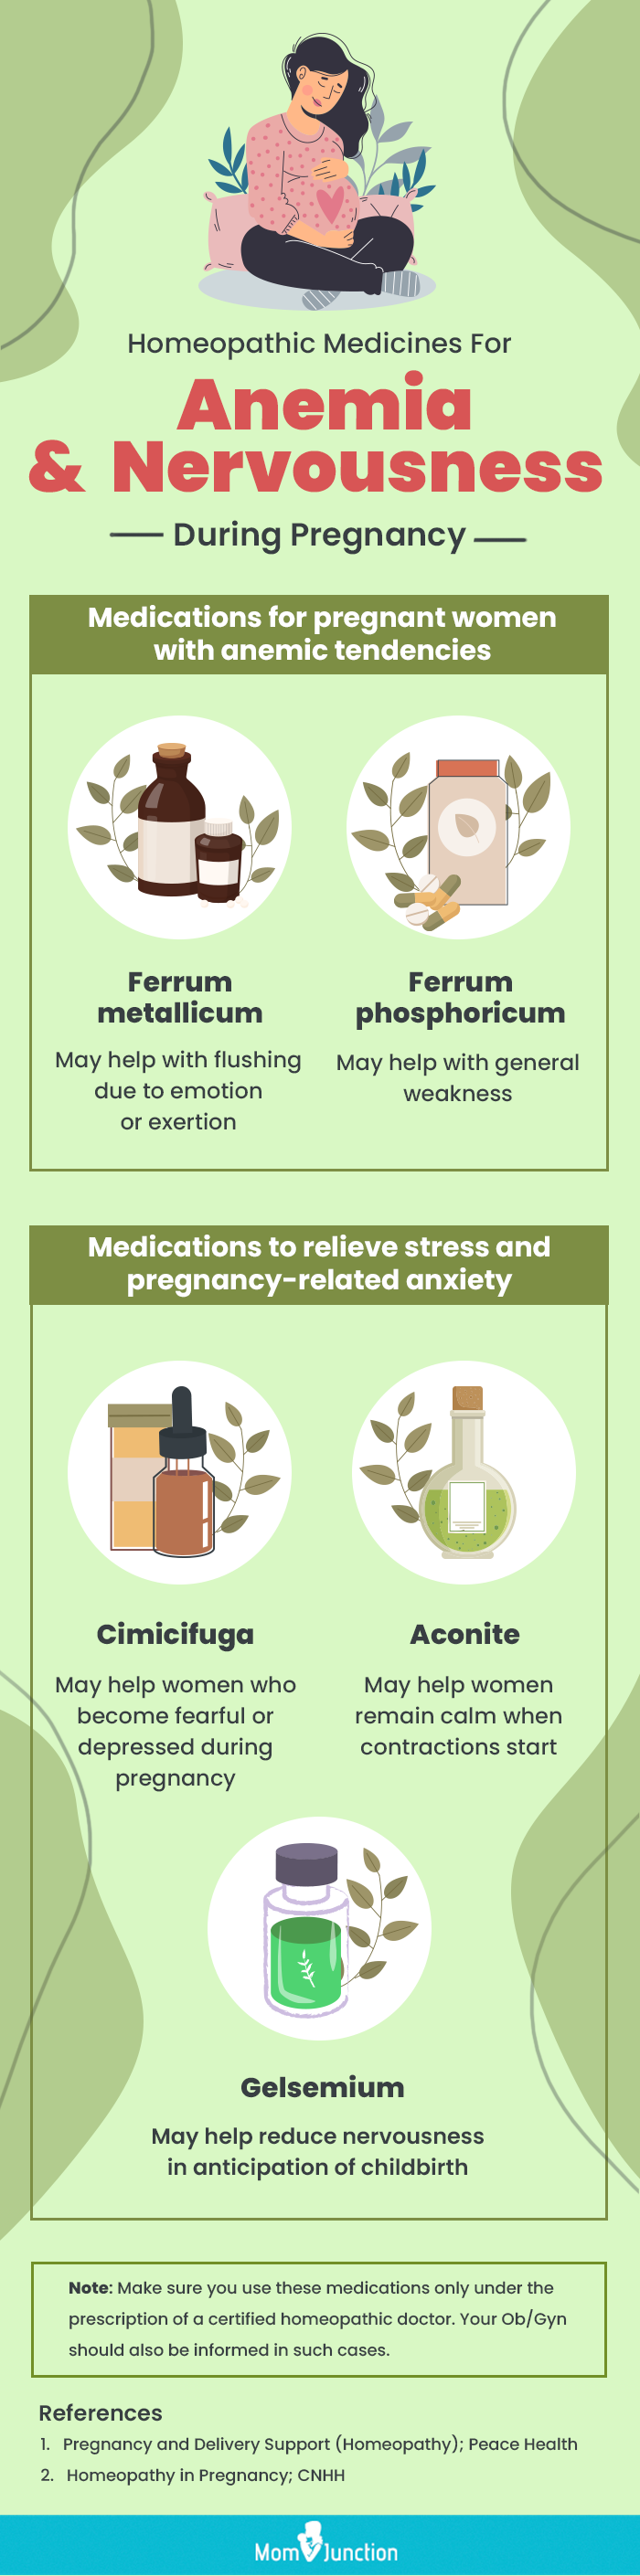 homeopathic medicines during pregnancy (infographic)